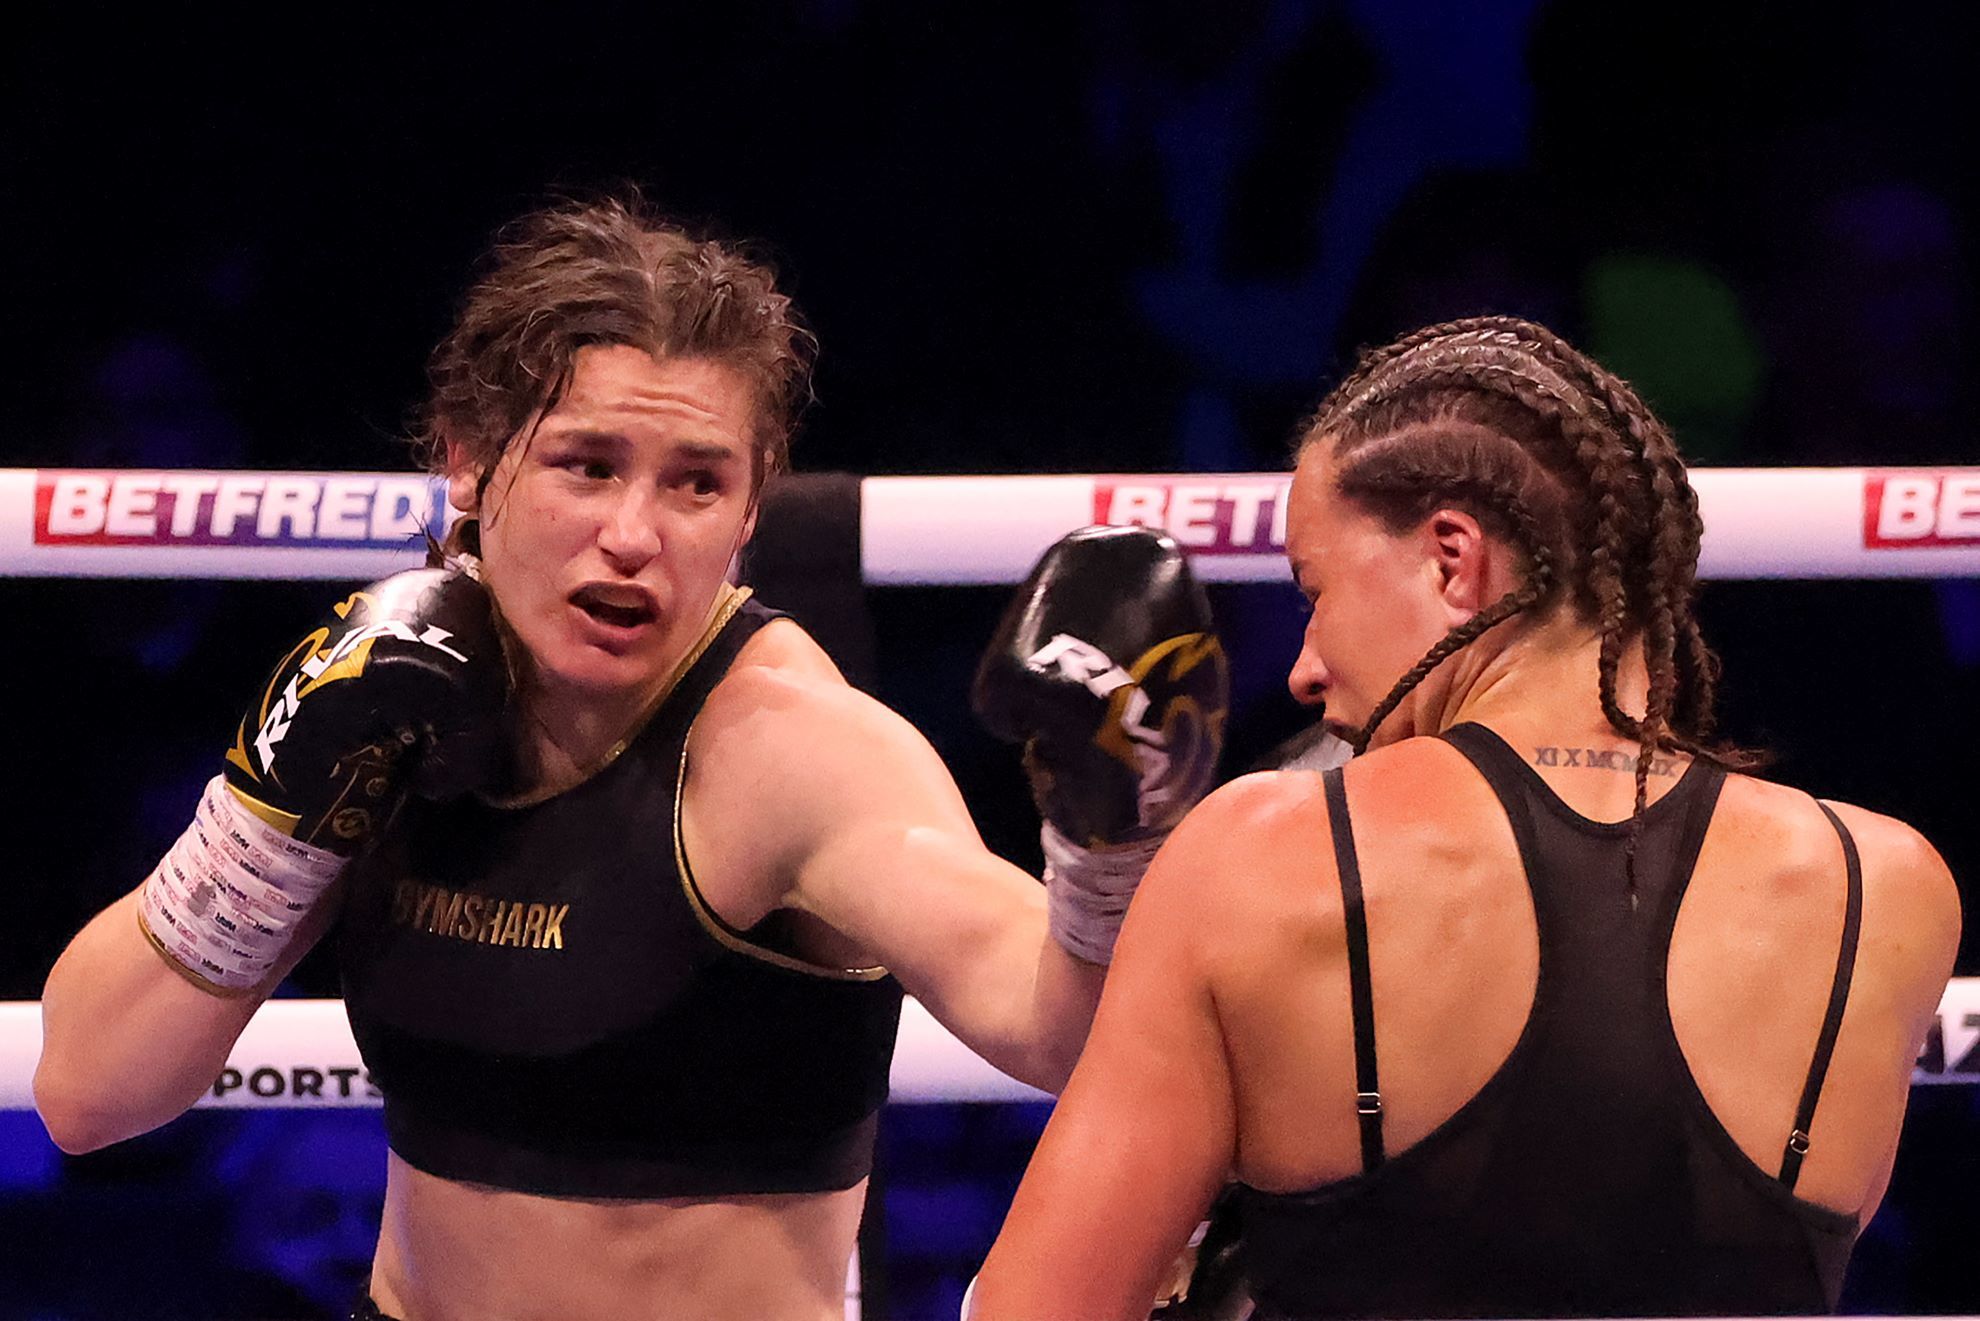 Katie Taylor lands a punch on Britains Chantelle Cameron during their light-welterweight boxing world title fight.